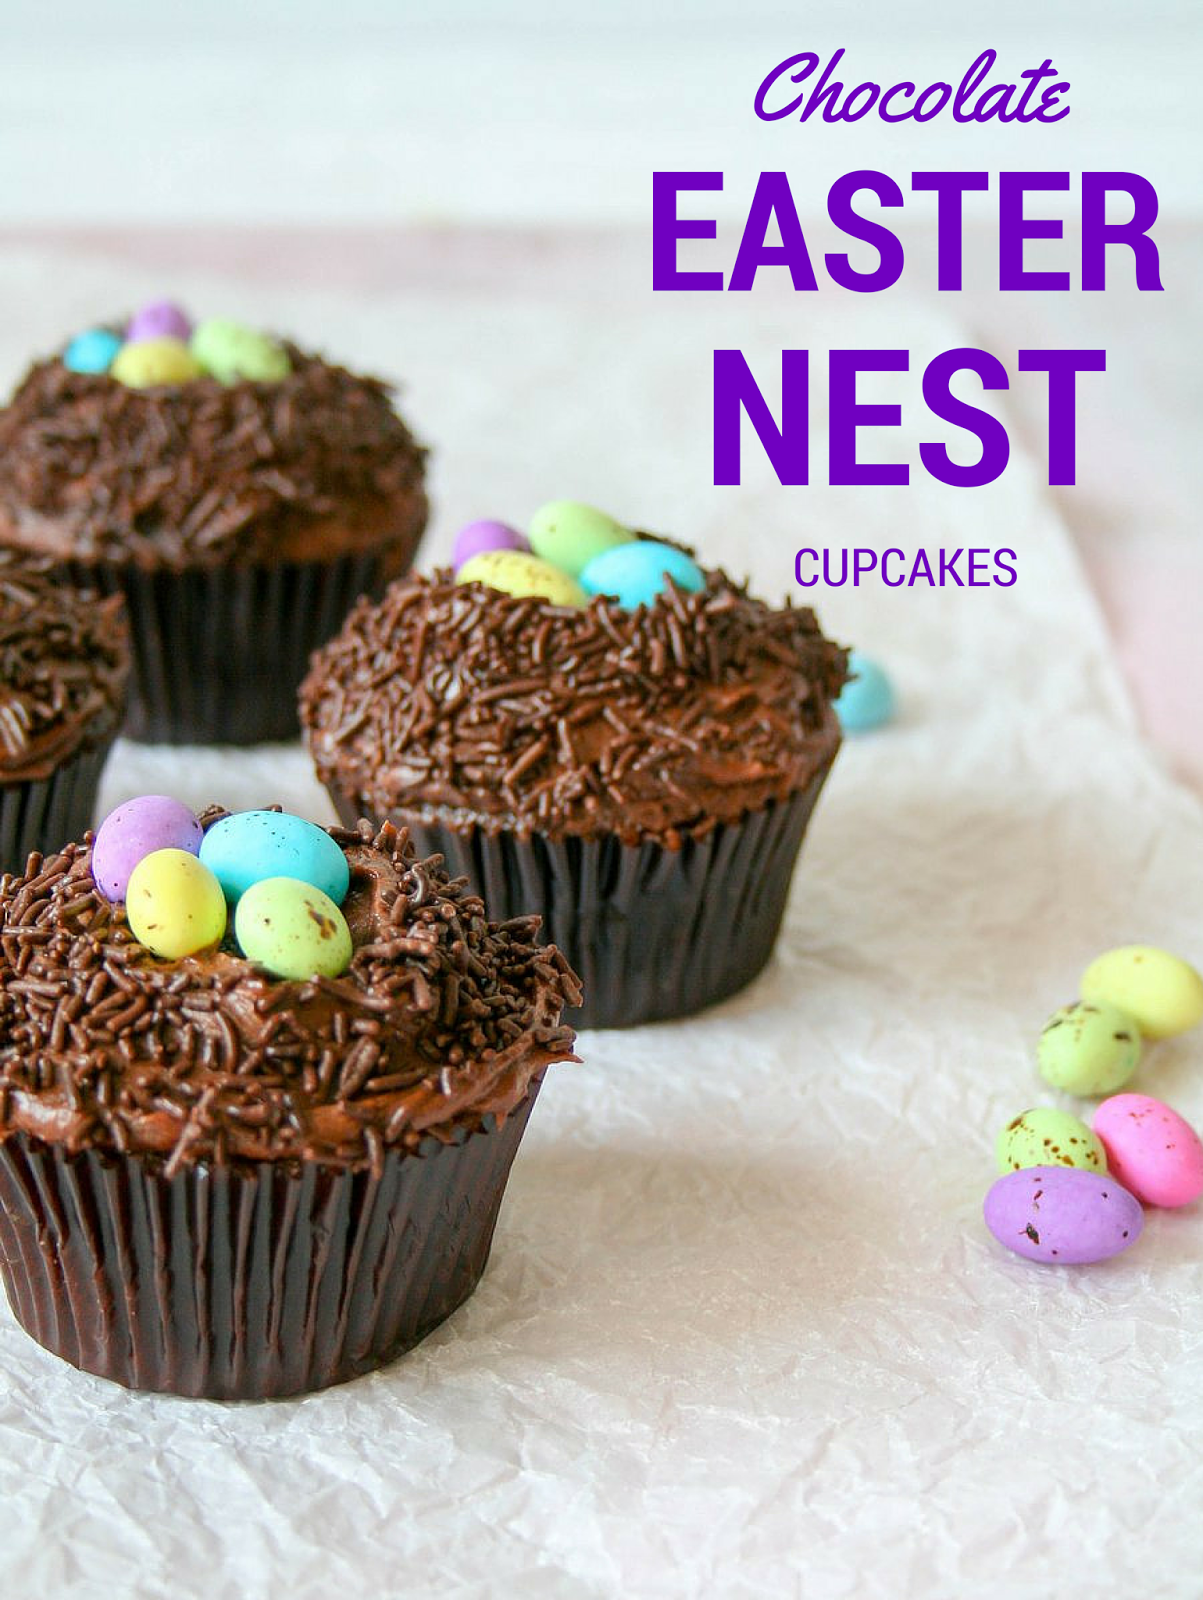 Cupcakes & Couscous: Chocolate Easter Nest Cupcakes